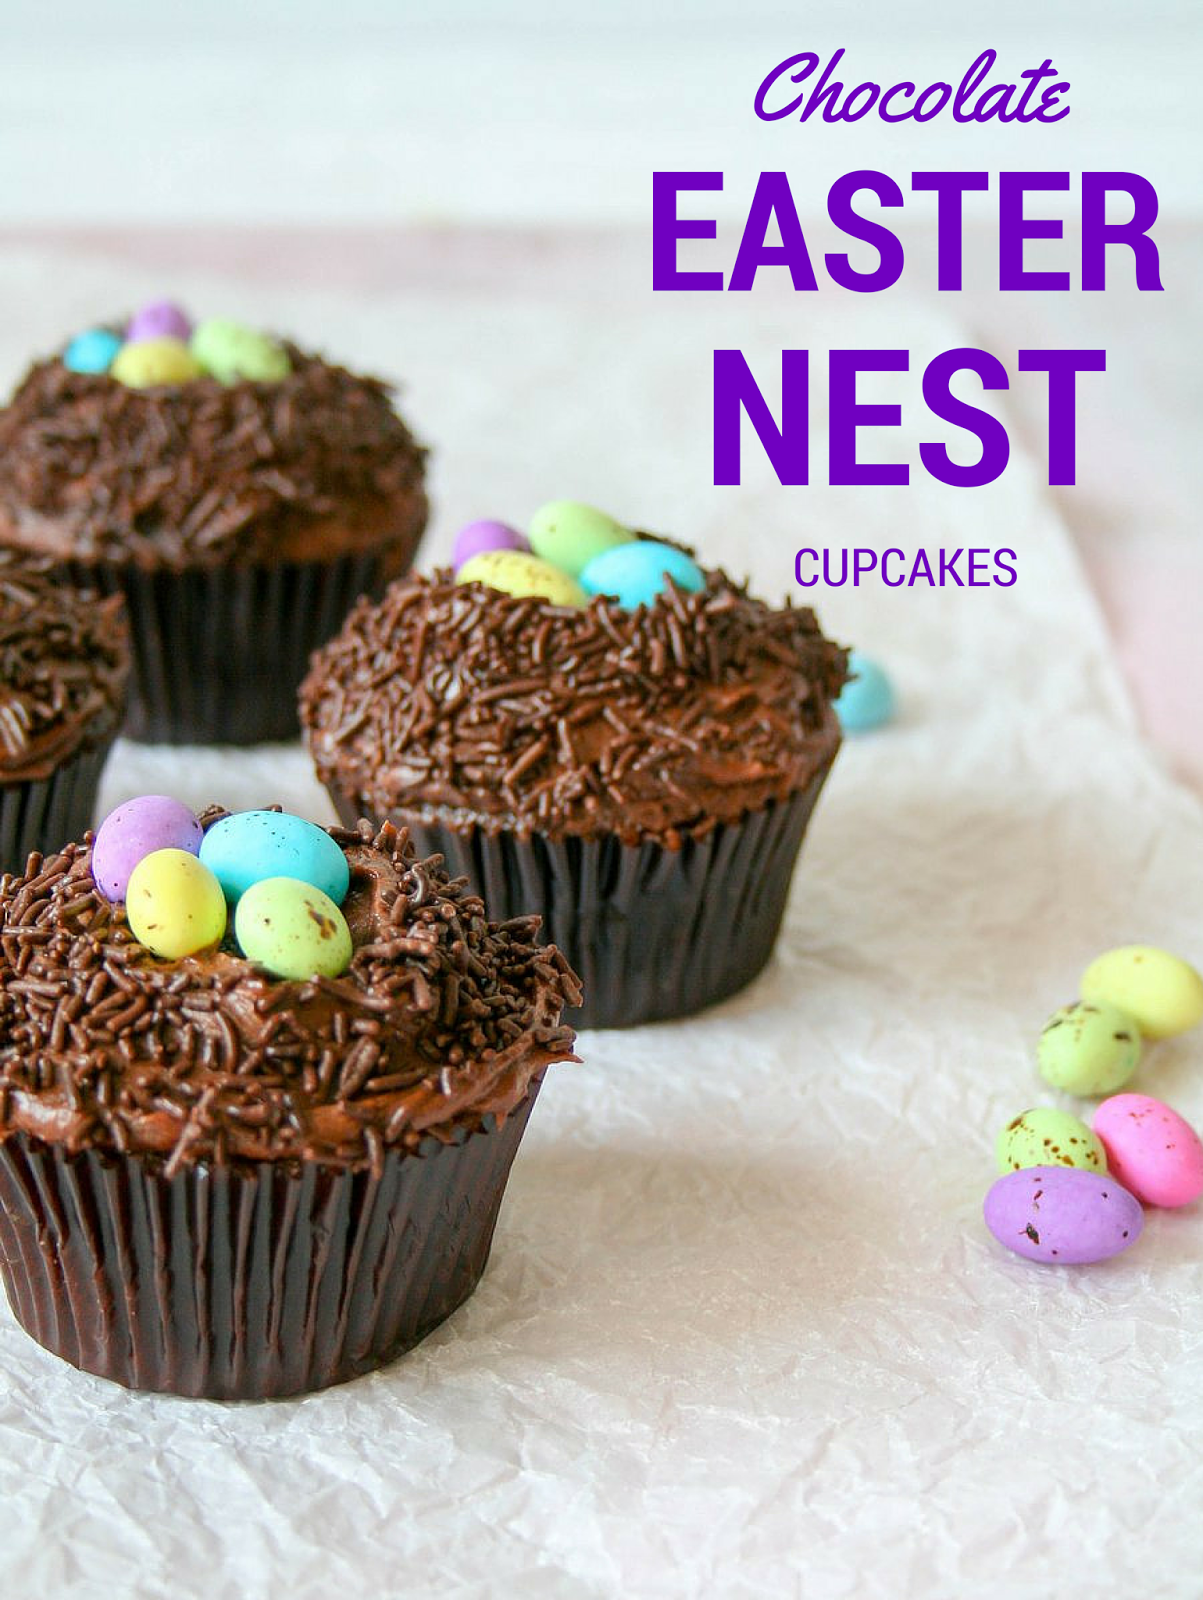 Cupcakes & Couscous: Chocolate Easter Nest Cupcakes